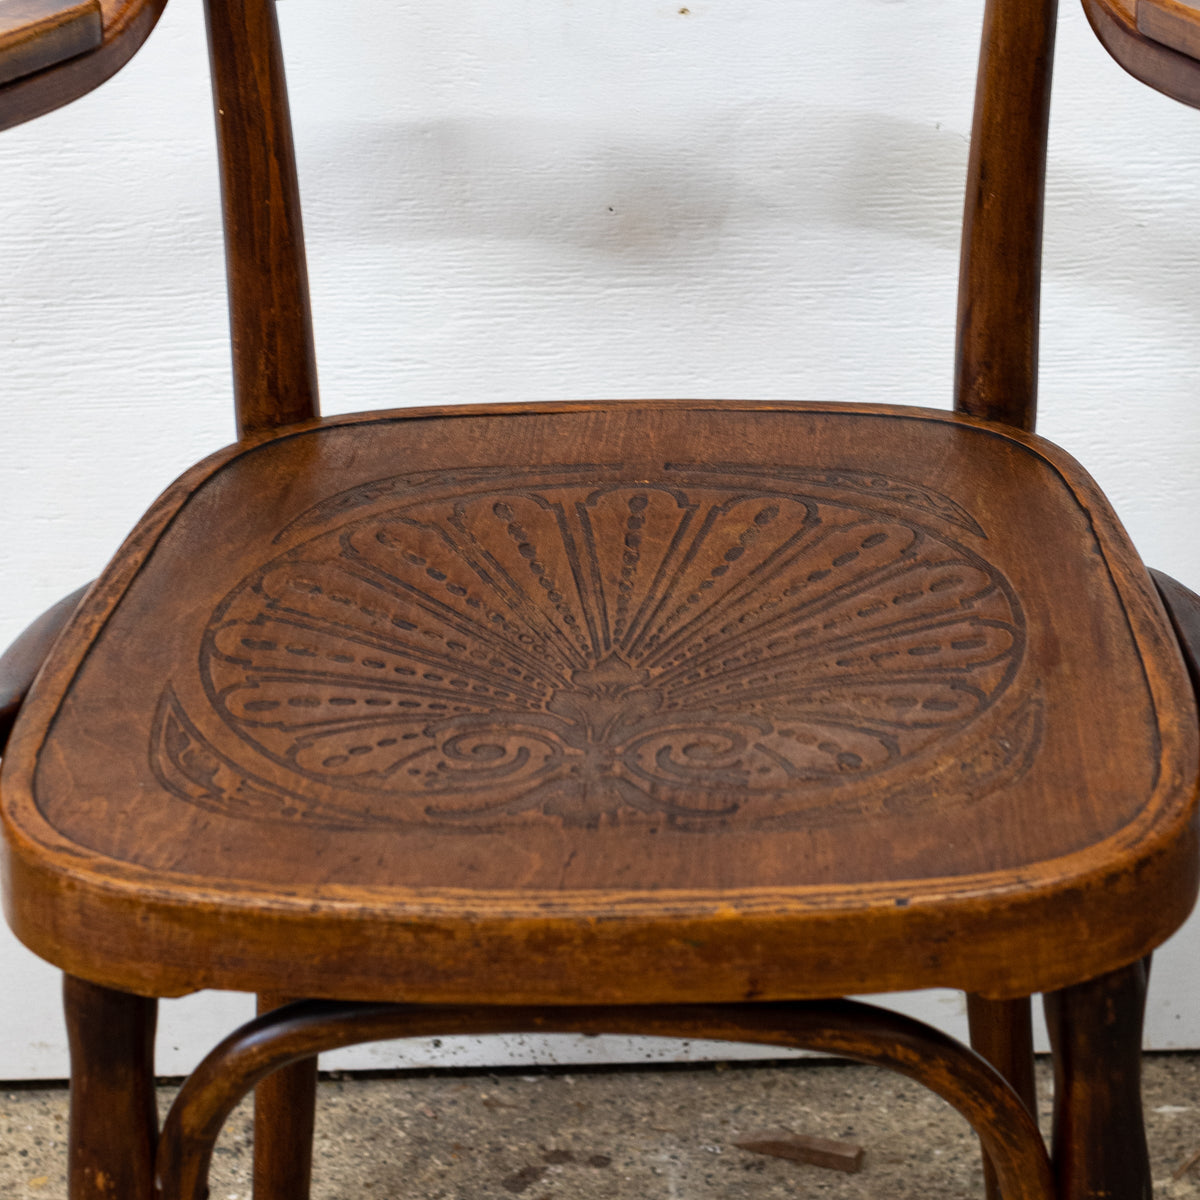 Antique Bentwood Beech Chairs | J&amp;J KOHN | The Architectural Forum